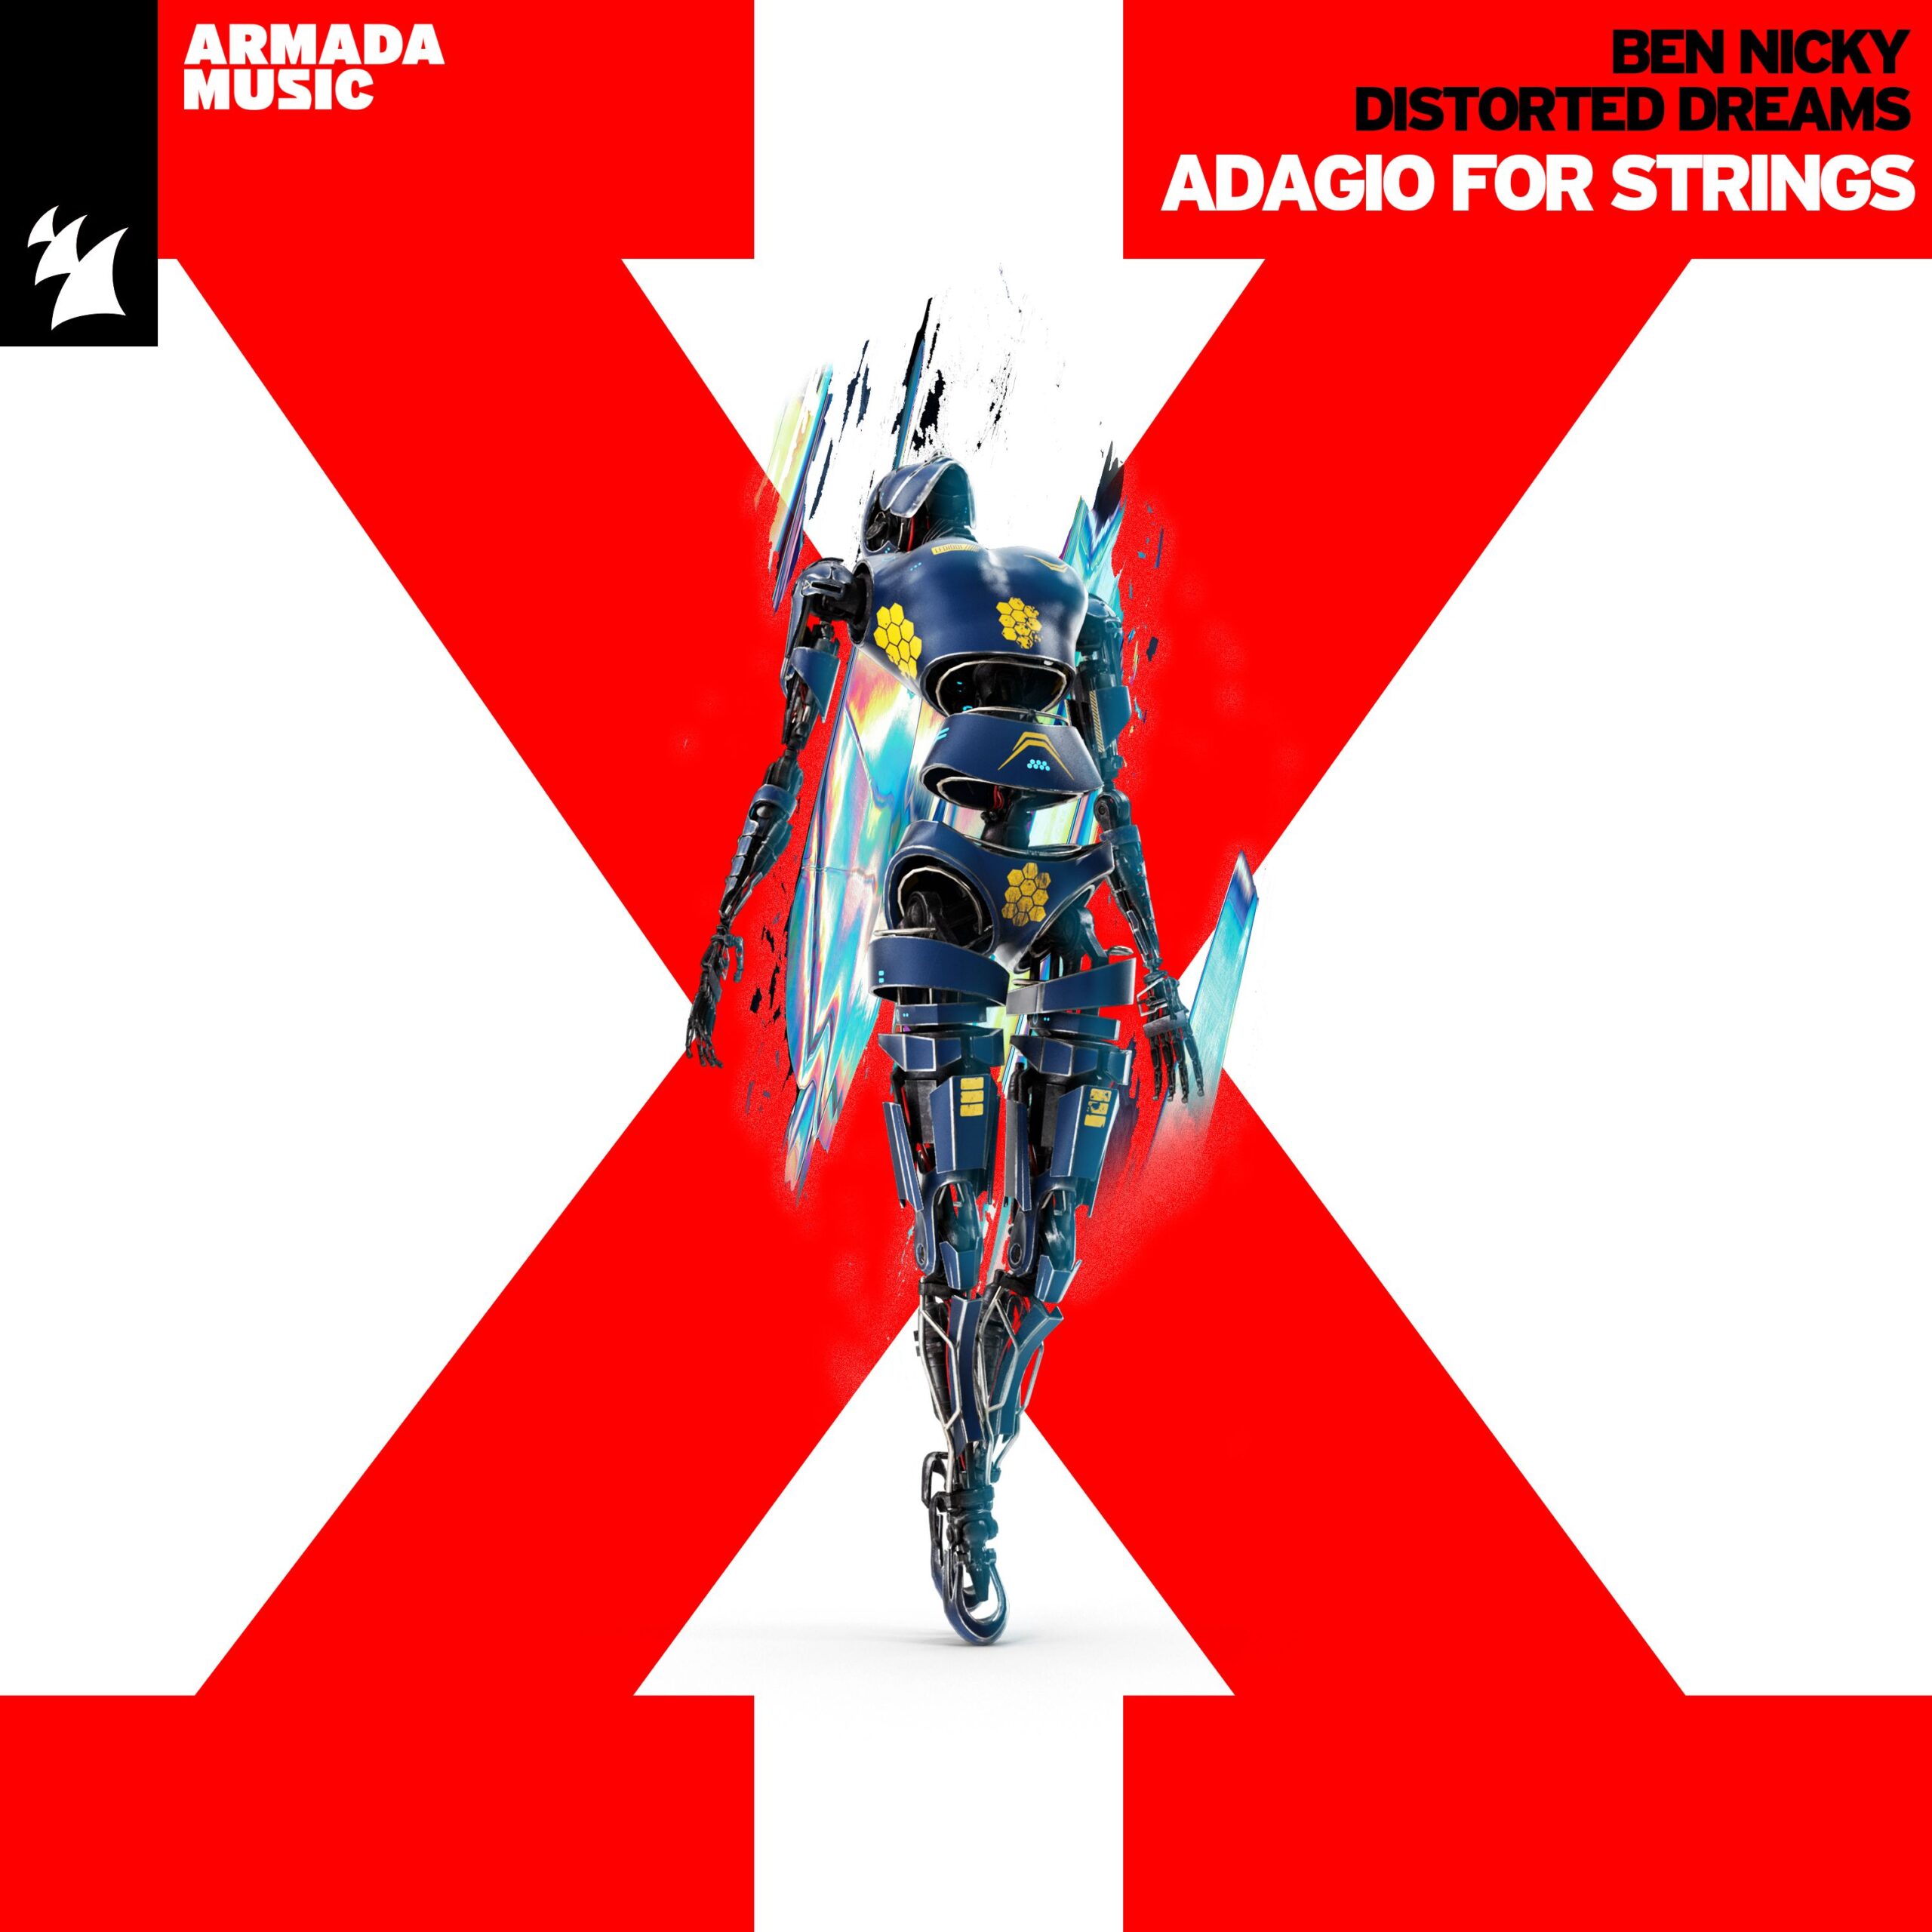 Distorted Dreams and Ben Nicky presents Adagio For Strings on Armada Music